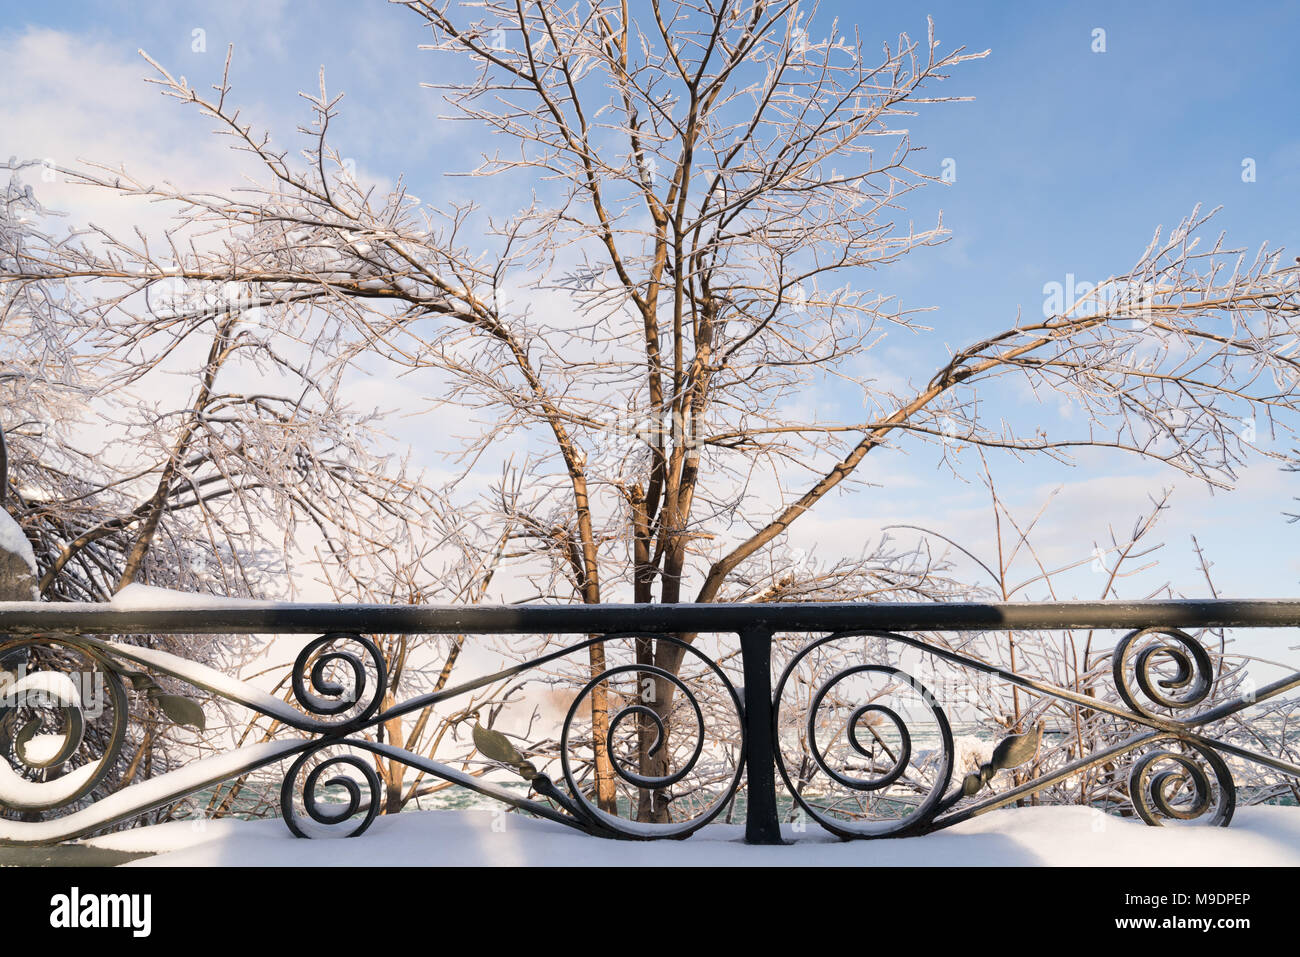 Snow and frozen trees with Niagara Falls behind Stock Photo